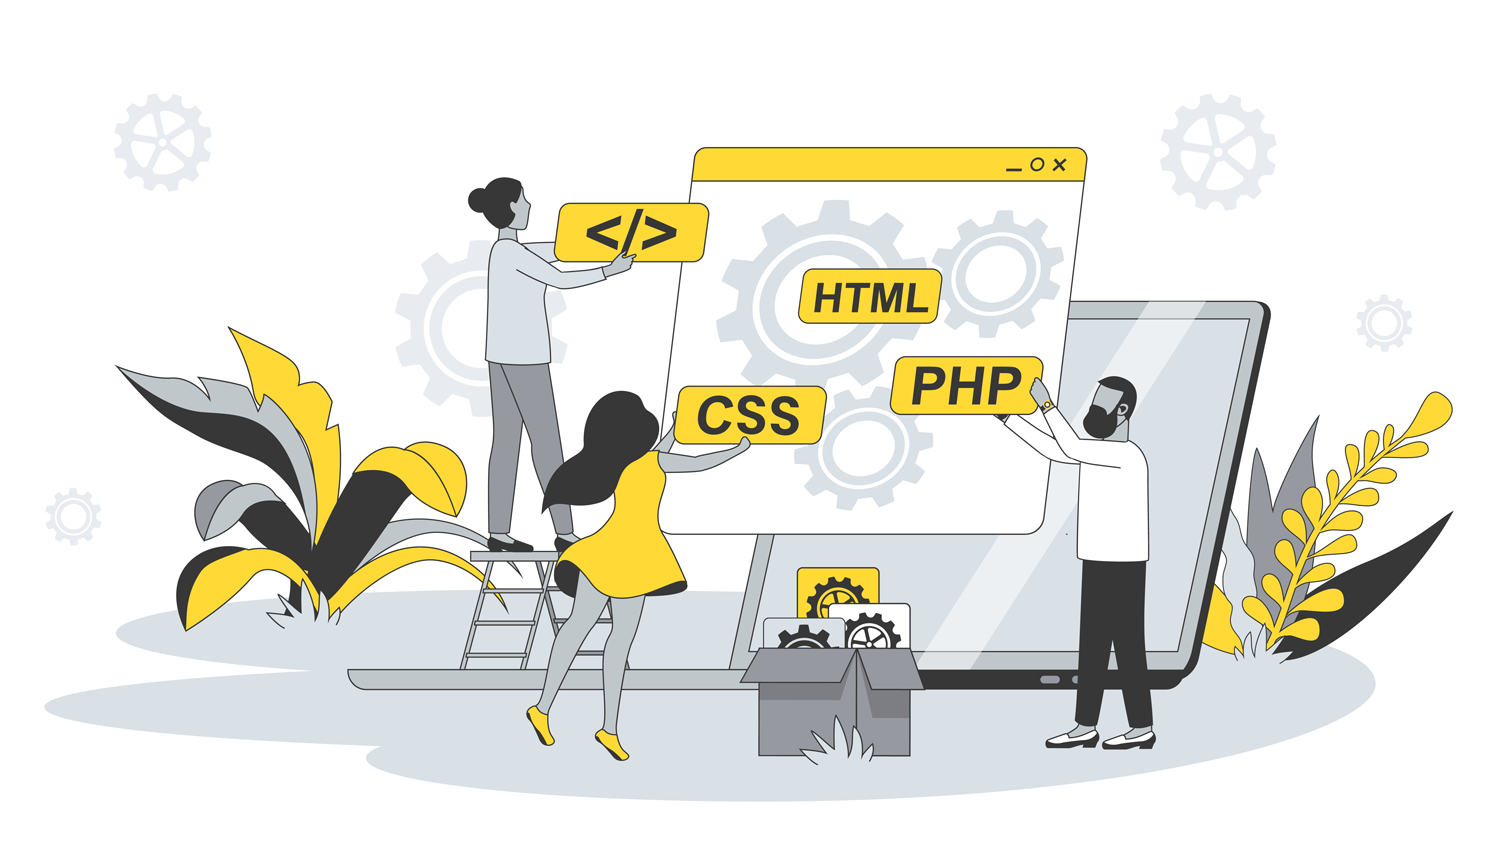 Developing team concept in flat design with people. Man and woman write and test code, programming on different languages, optimize programs. Vector illustration with character scene for web banner